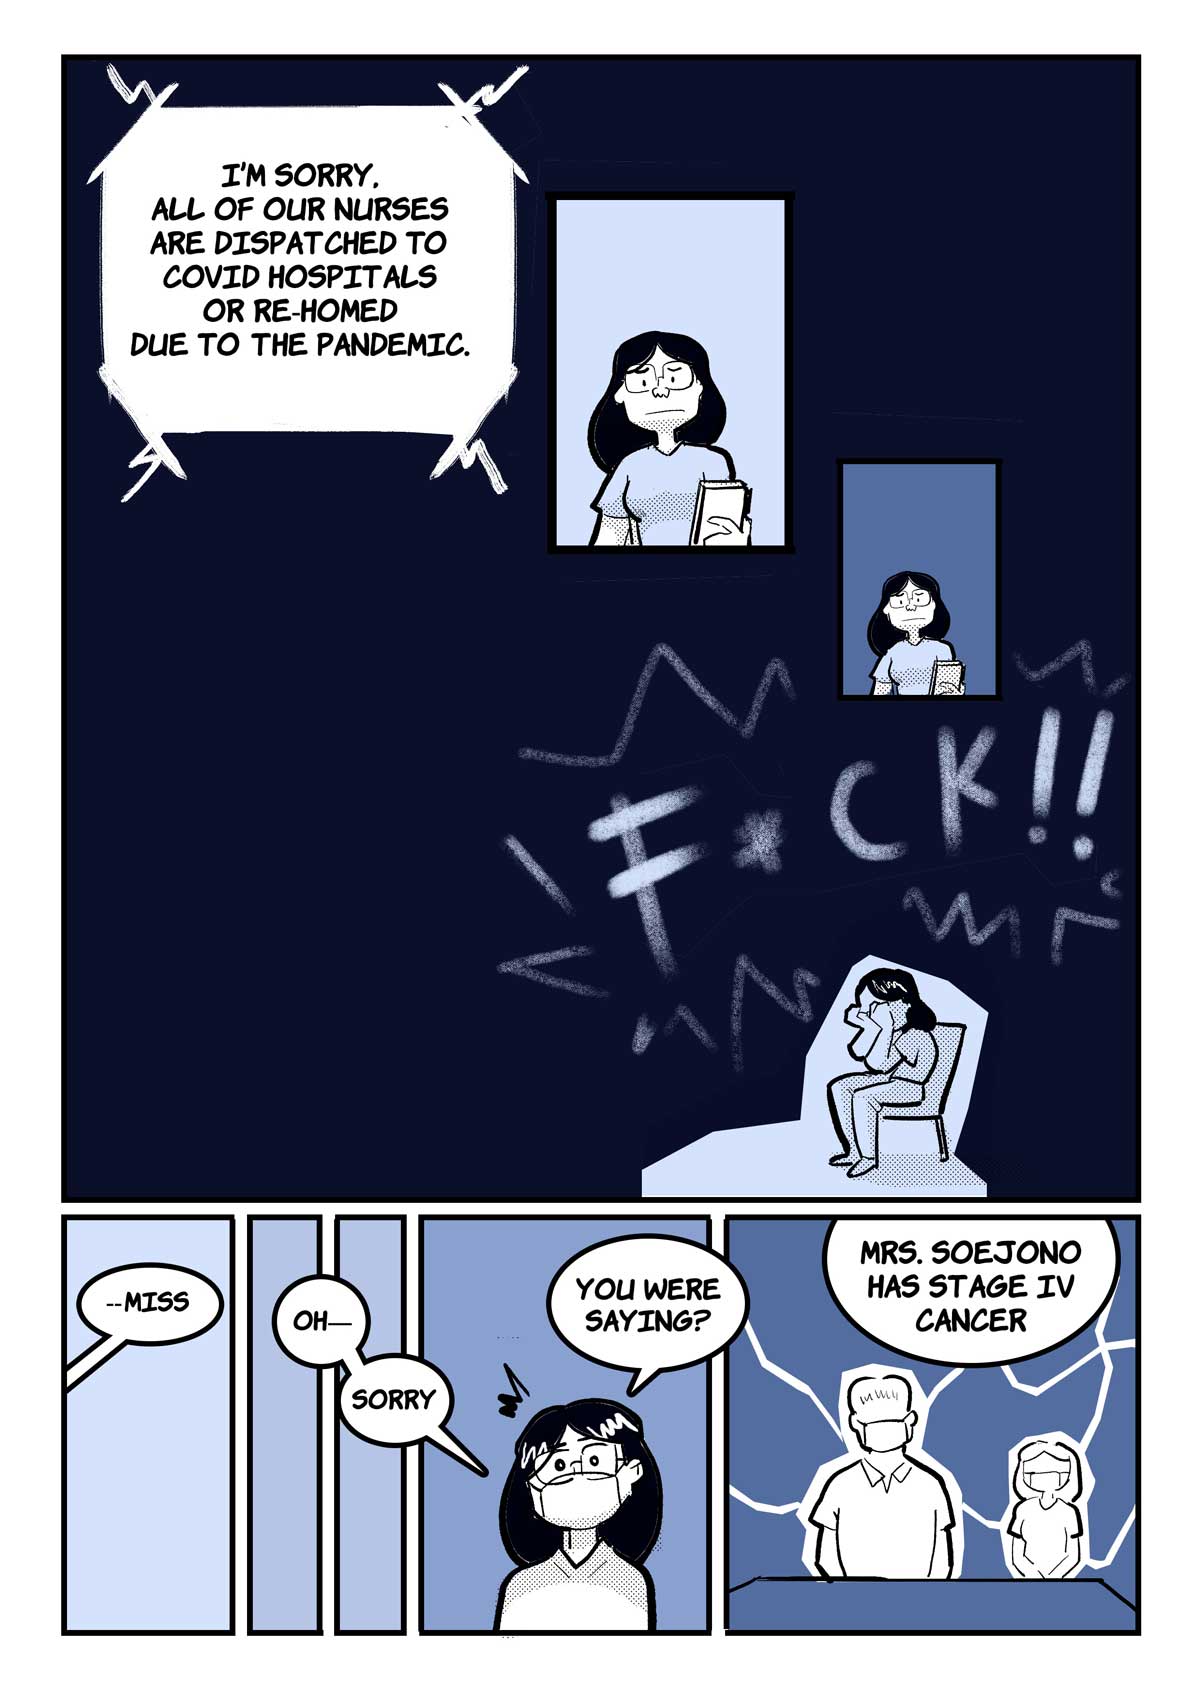 A comic page of 3 panels in black and various shades of blue and grey.
Panel 1. Receptionist's voice: "I’m sorry, all of our nurses are dispatched to COVID hospitals or re-homed due to the pandemic." Stephani is speechless. In the bottom right of the panel, she settles on a chair and folds her face into her palms. F*ck! she exclaims.
Panel 2. A nurse's voice ("Miss?") jolts Stephani from her thoughts. She replies, flustered, "Oh—sorry—you were saying?"
Panel 3. Nurse: "Mrs. Soejono has stage IV cancer." The realisation strikes like a bolt of lightning. Stephani and her father are frozen.